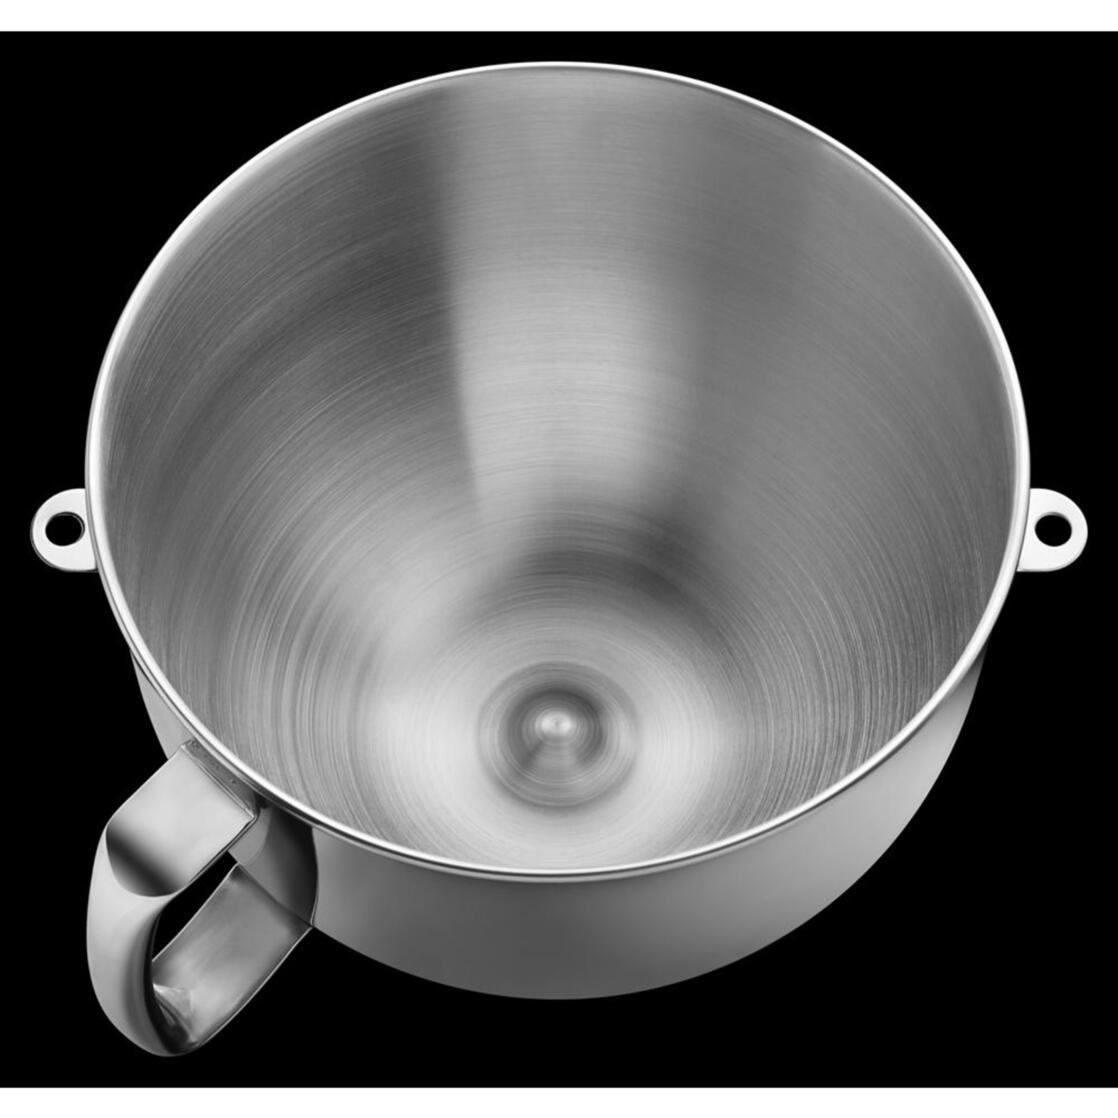 KitchenAid 6 Quart Bowl-Lift Polished Stainless Steel Bowl with Comfortable Handle - KN2B6PEH - image 2 of 3